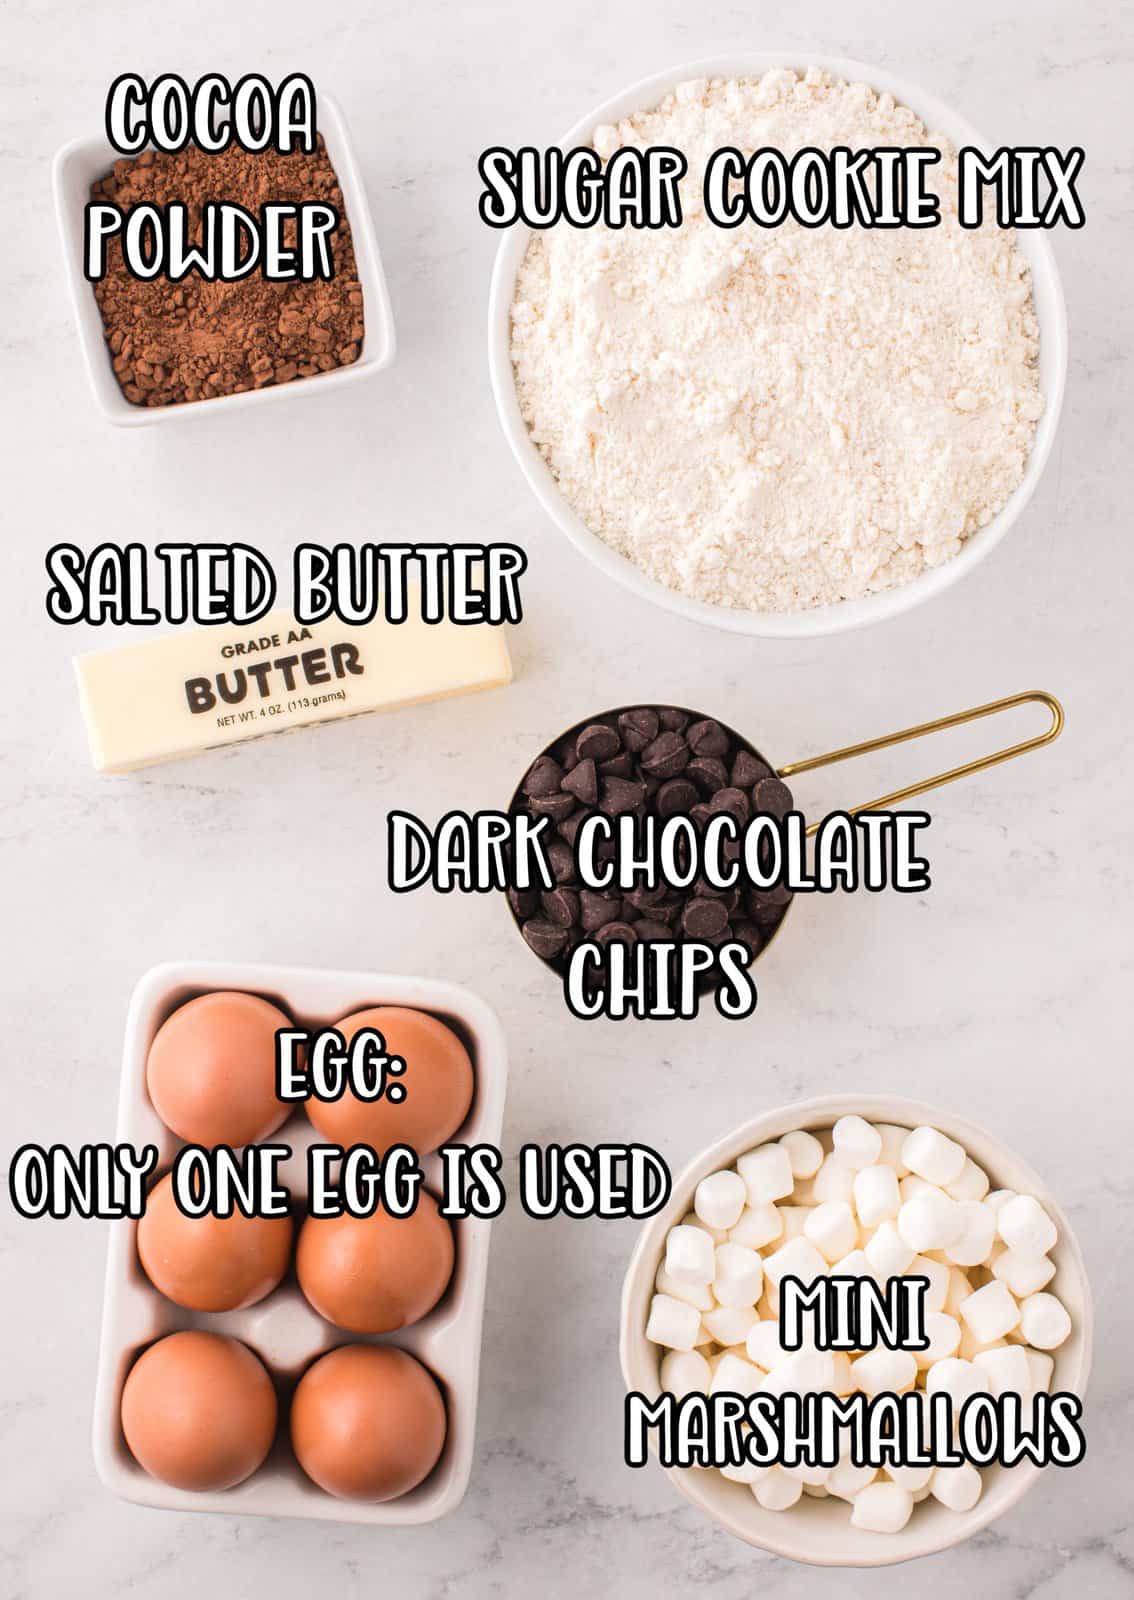 Cocoa powder, eggs, mini marshmallows, butter, dark chocolate chips and sugar cookie mix. 